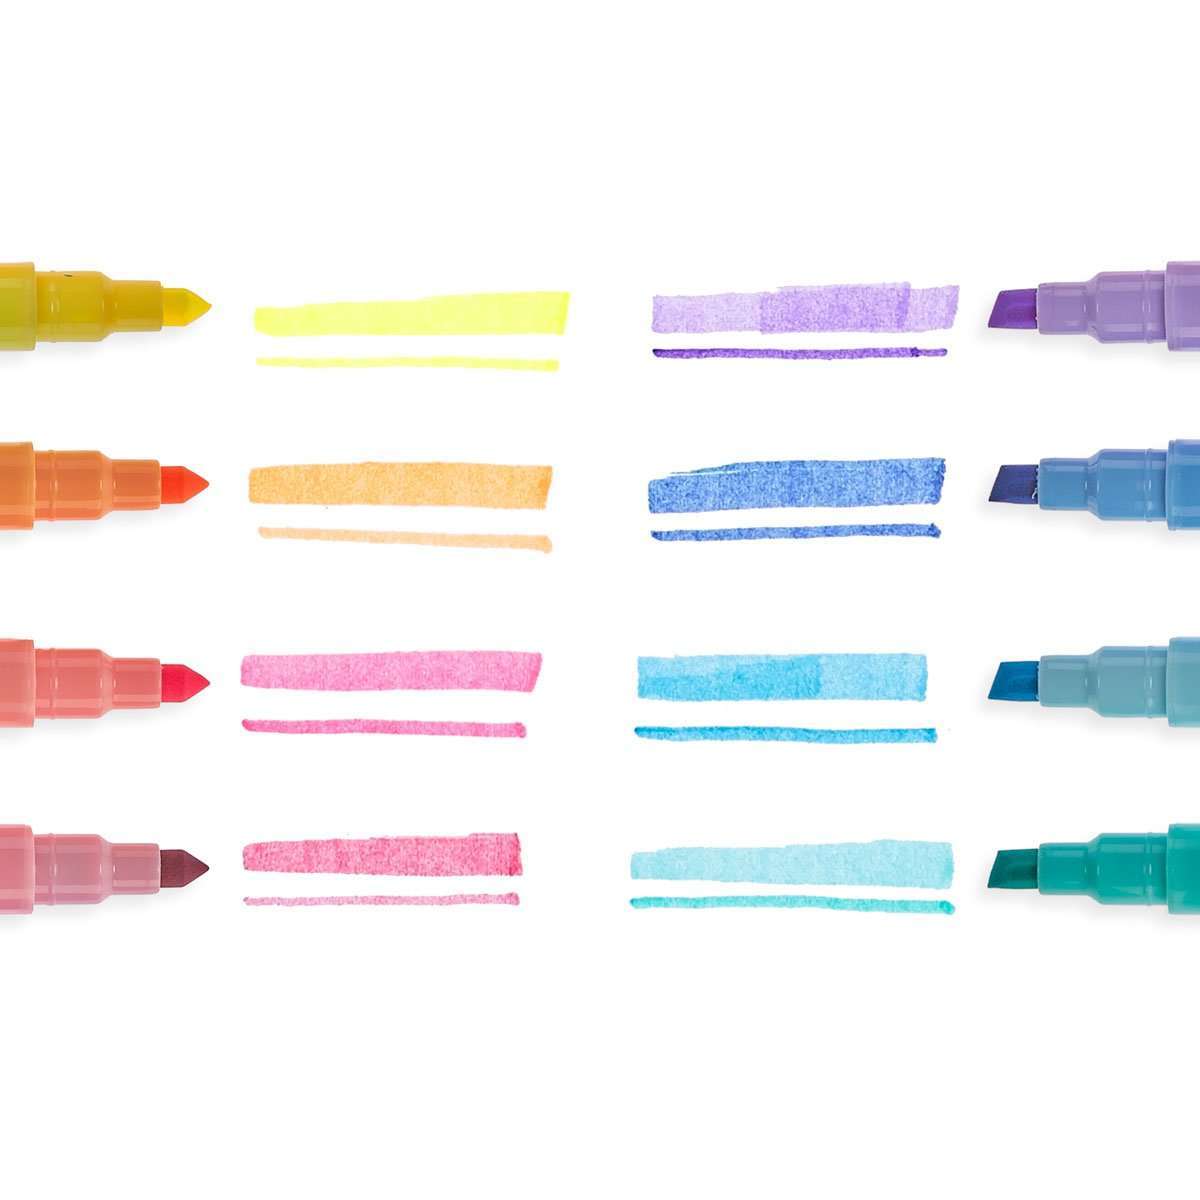 Pastel Liner Double Ended Markers - Set of 8:Primary Classroom Resources